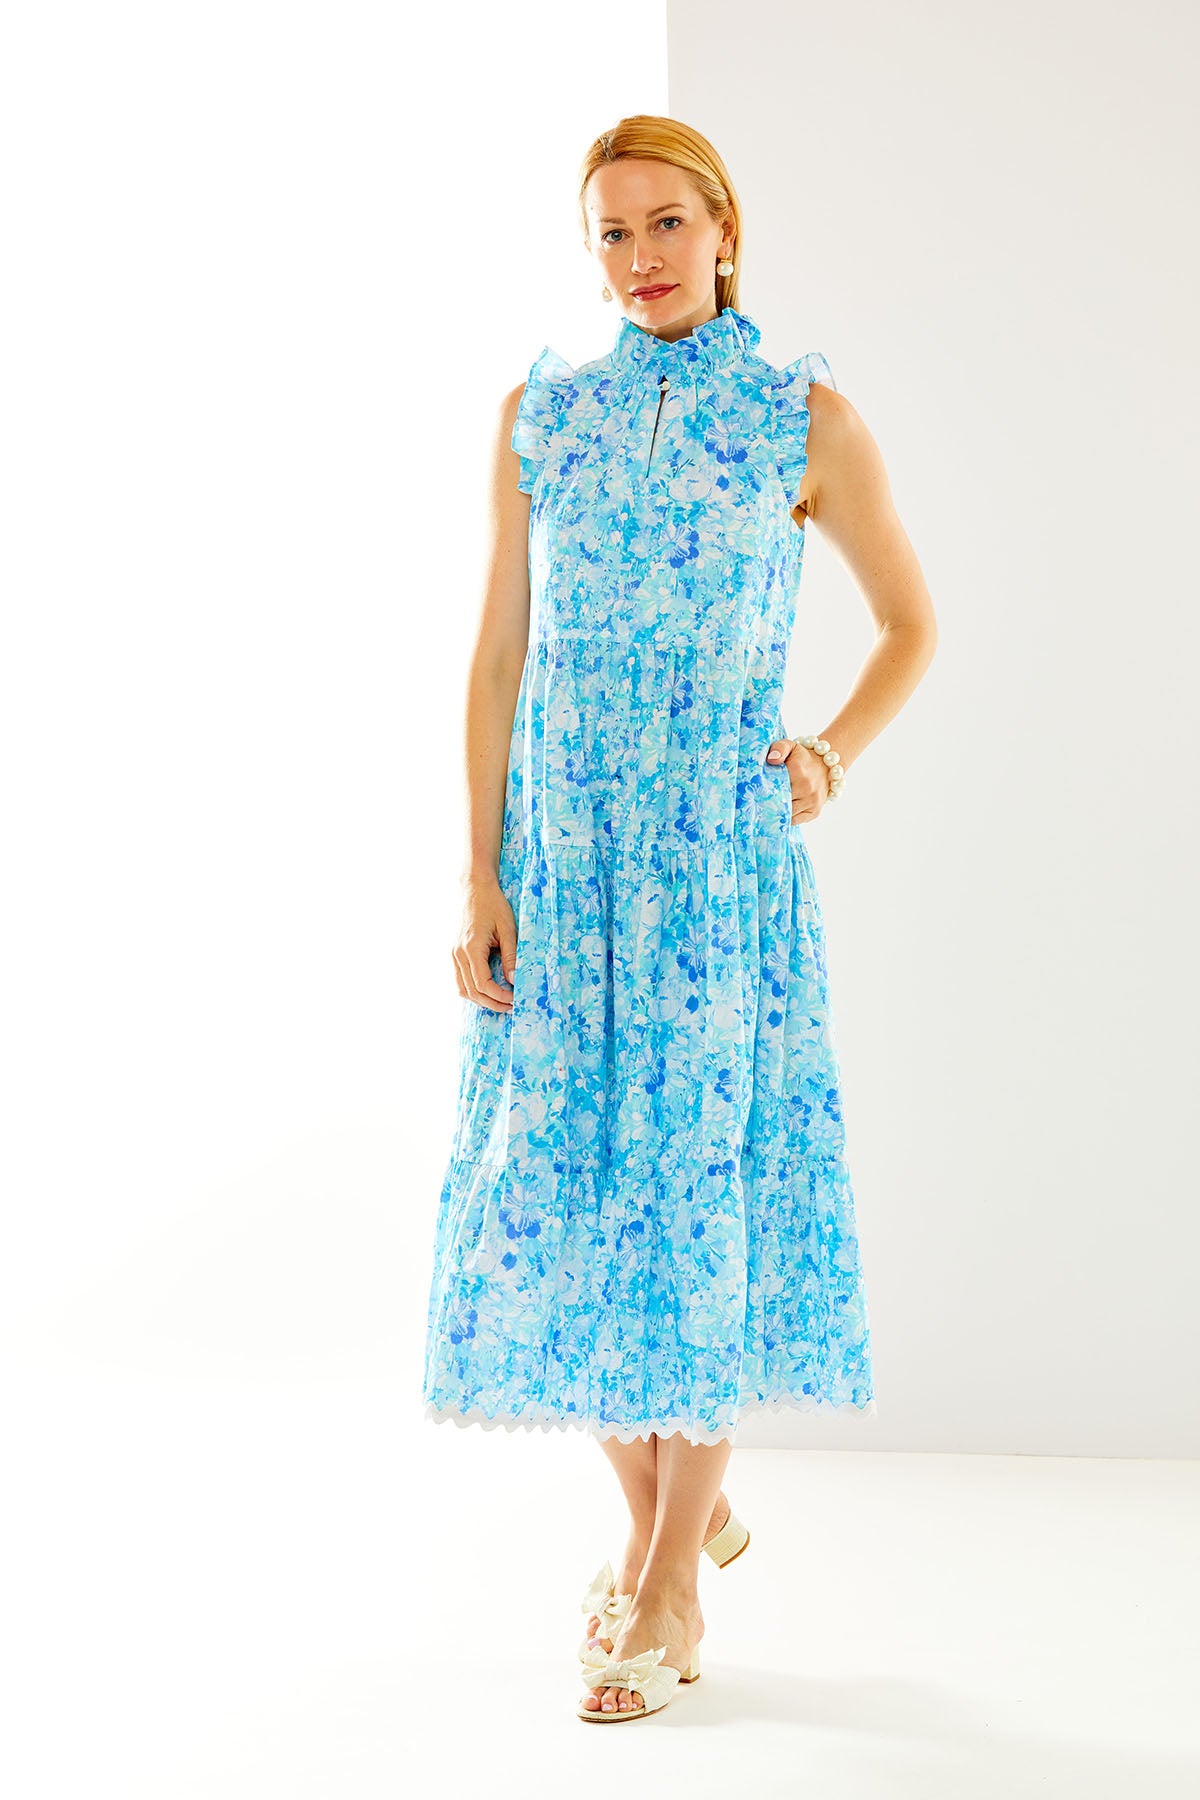 Woman in blue floral maxi dress